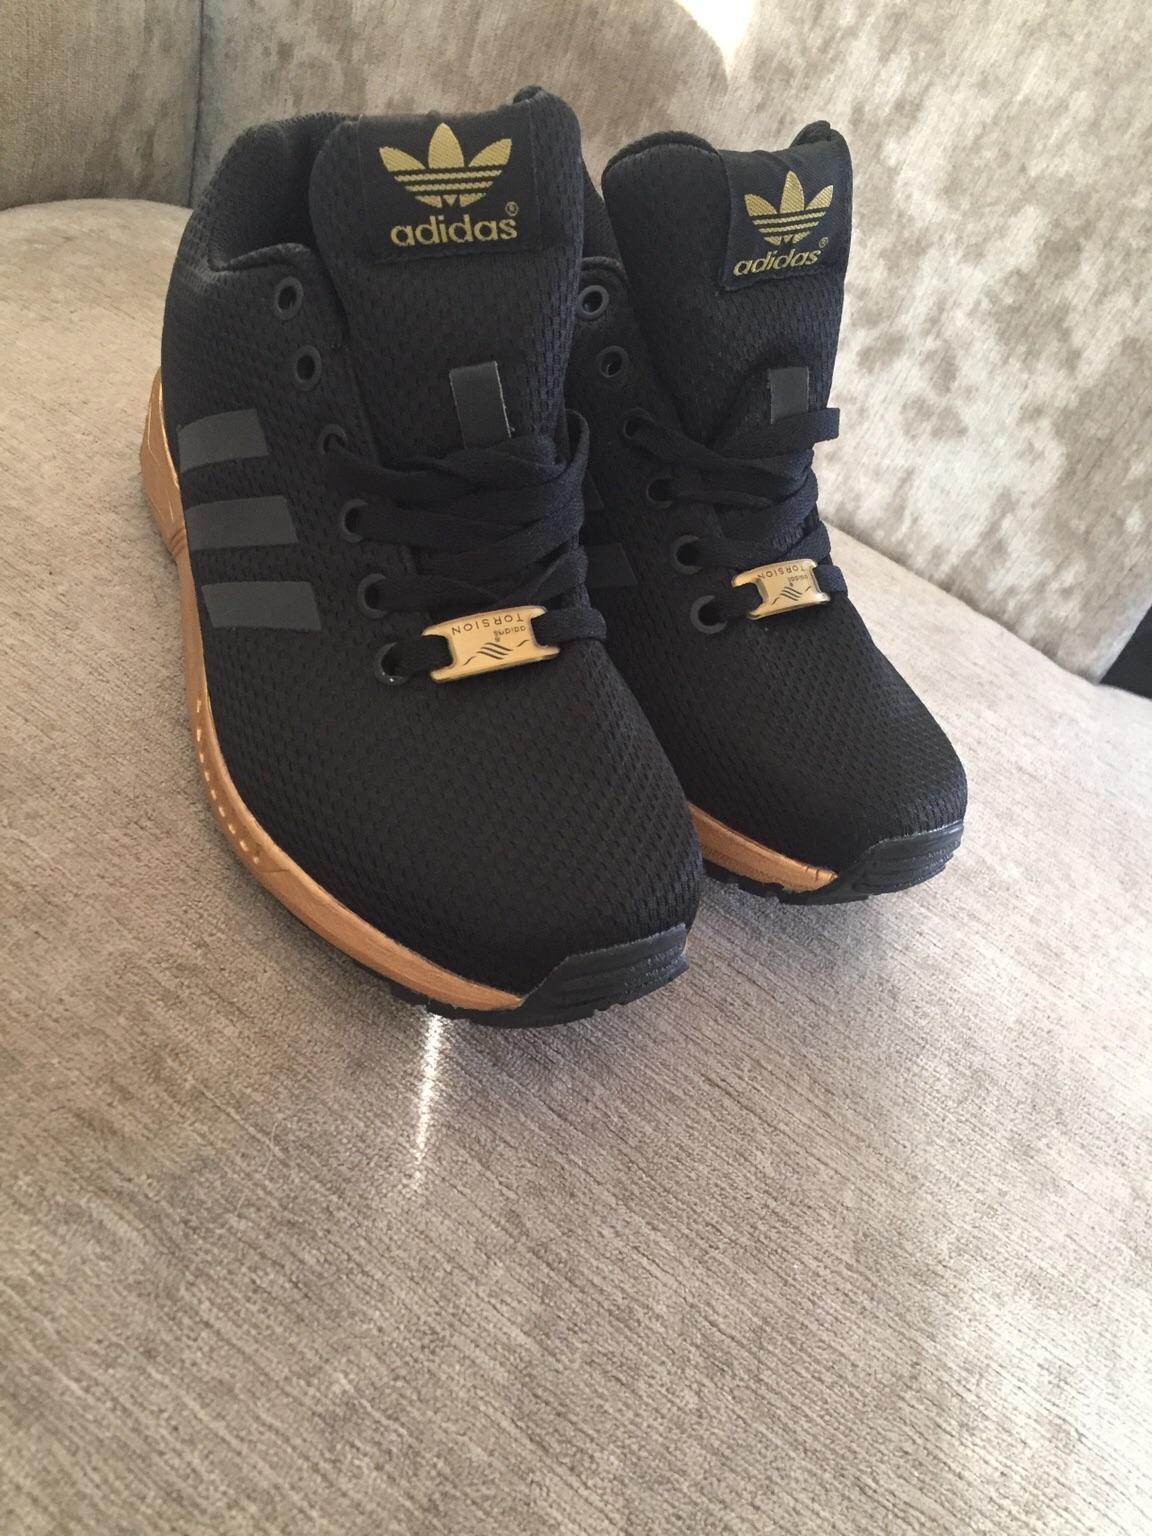 Emigrar Humedad caridad Shoes, Adidas Shoes, Adidas Rose Gold Zx Flux, Adidas, Adidas Zx Flux, Black  Sneakers, Black, Gold, Adiddas, Black And Gold Adidas Flux, Low Top  Sneakers Wheretoget | xn--90absbknhbvge.xn--p1ai:443